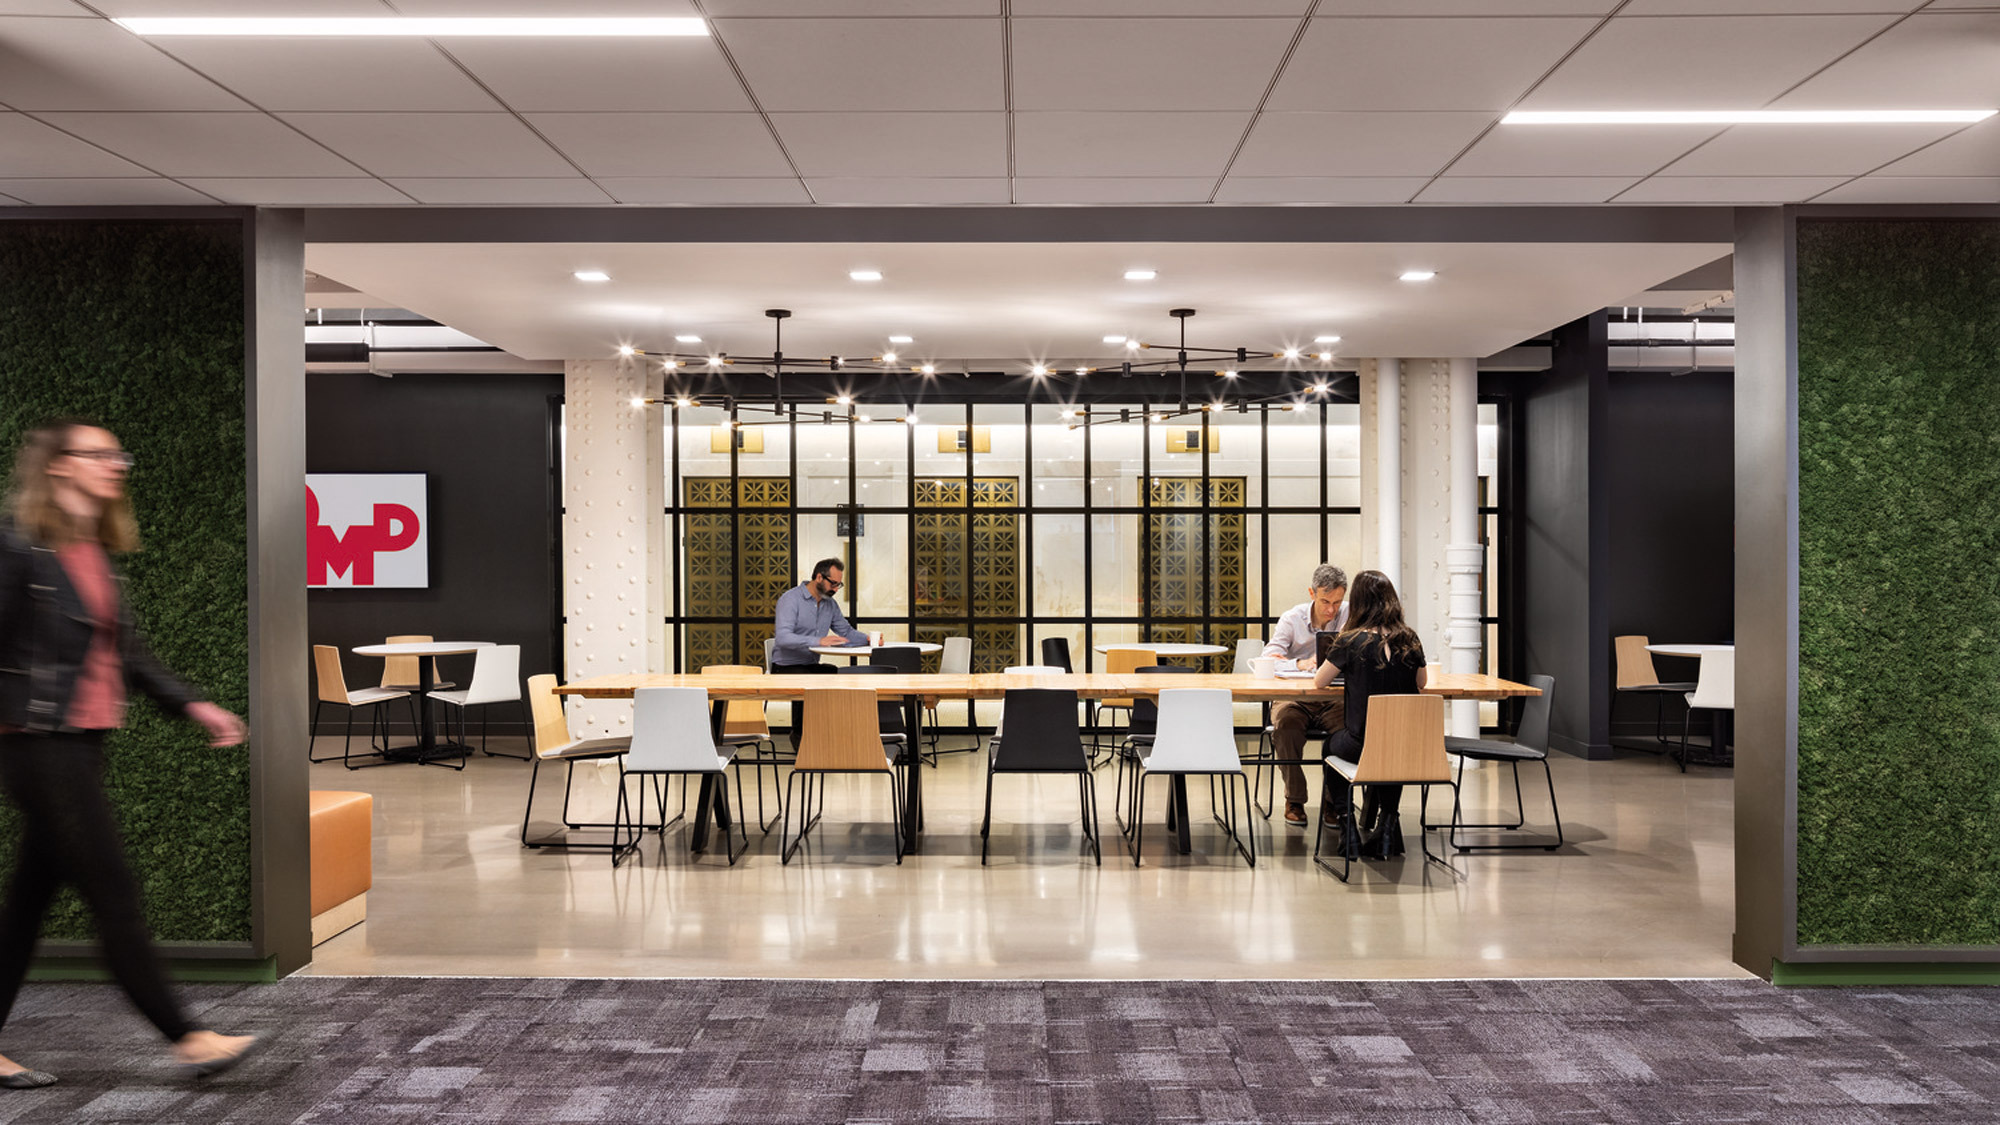 Modern office breakroom featuring polished concrete floors, light wood tables, and white Eames-style chairs under ambient lighting, with individuals collaborating casually. Exposed brick walls and a bold company logo accentuate the industrial-chic aesthetic of the space.